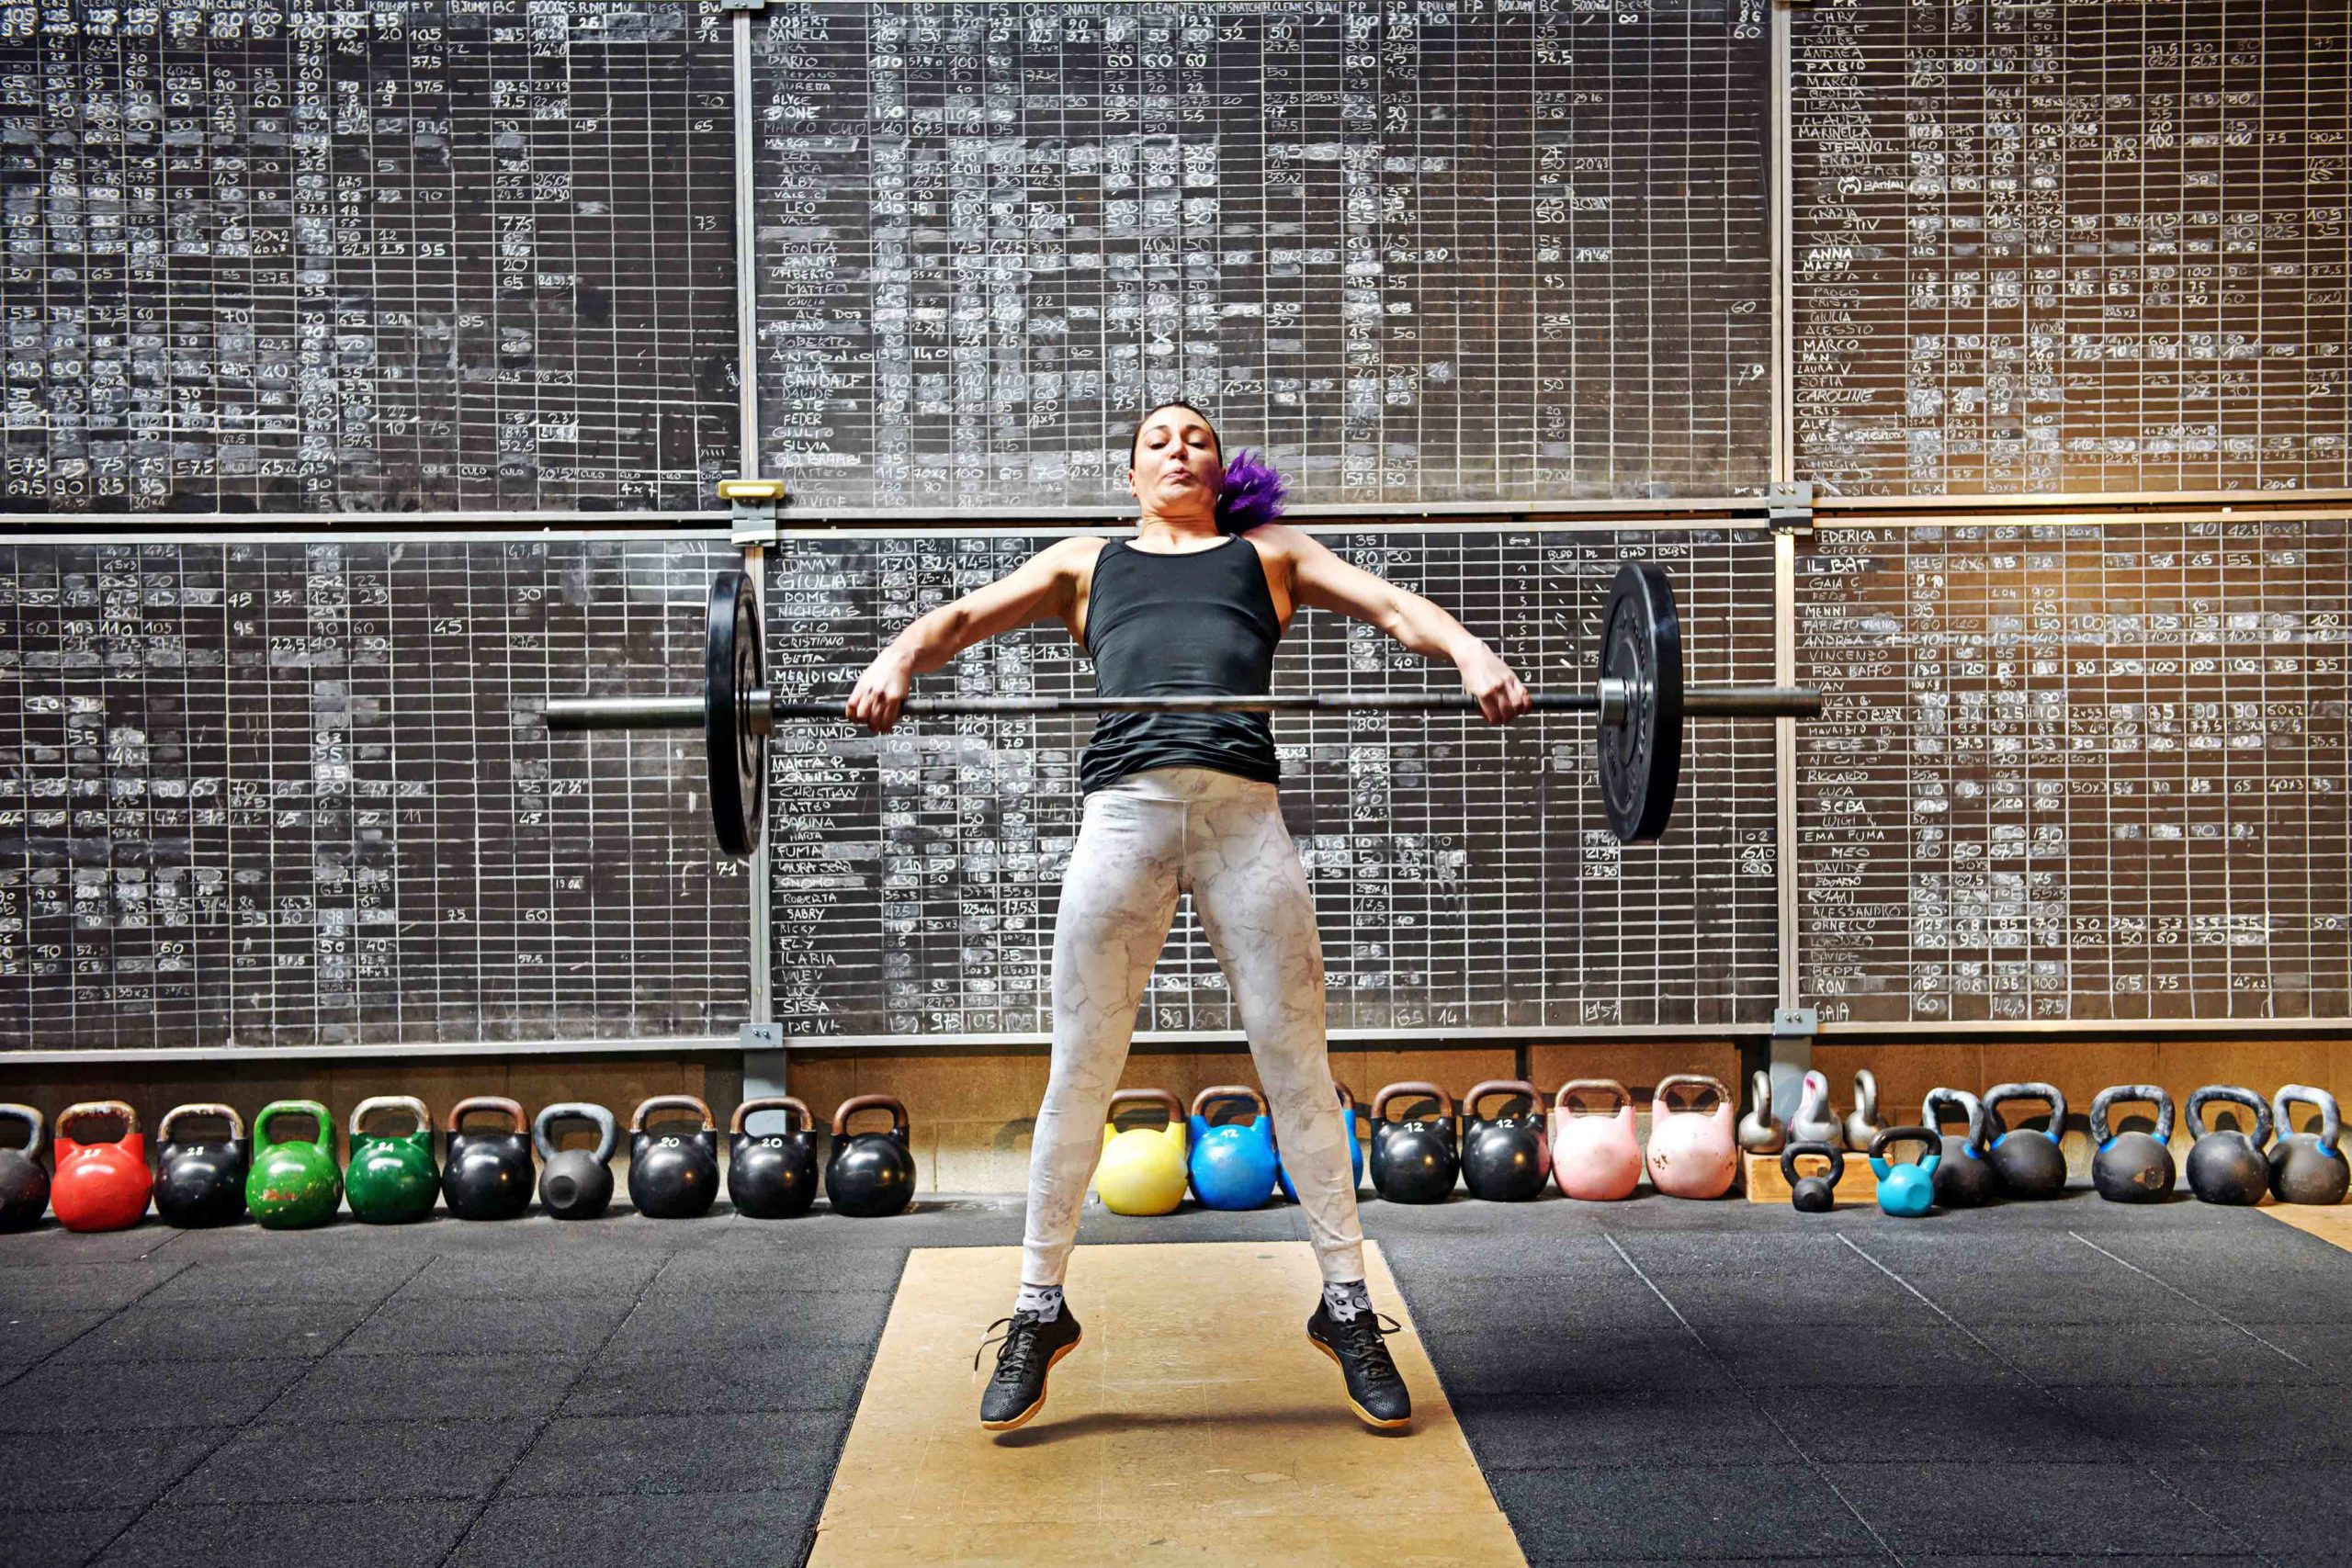 Snatch Workout: 5 of the Best Snatch Workouts You Should Try